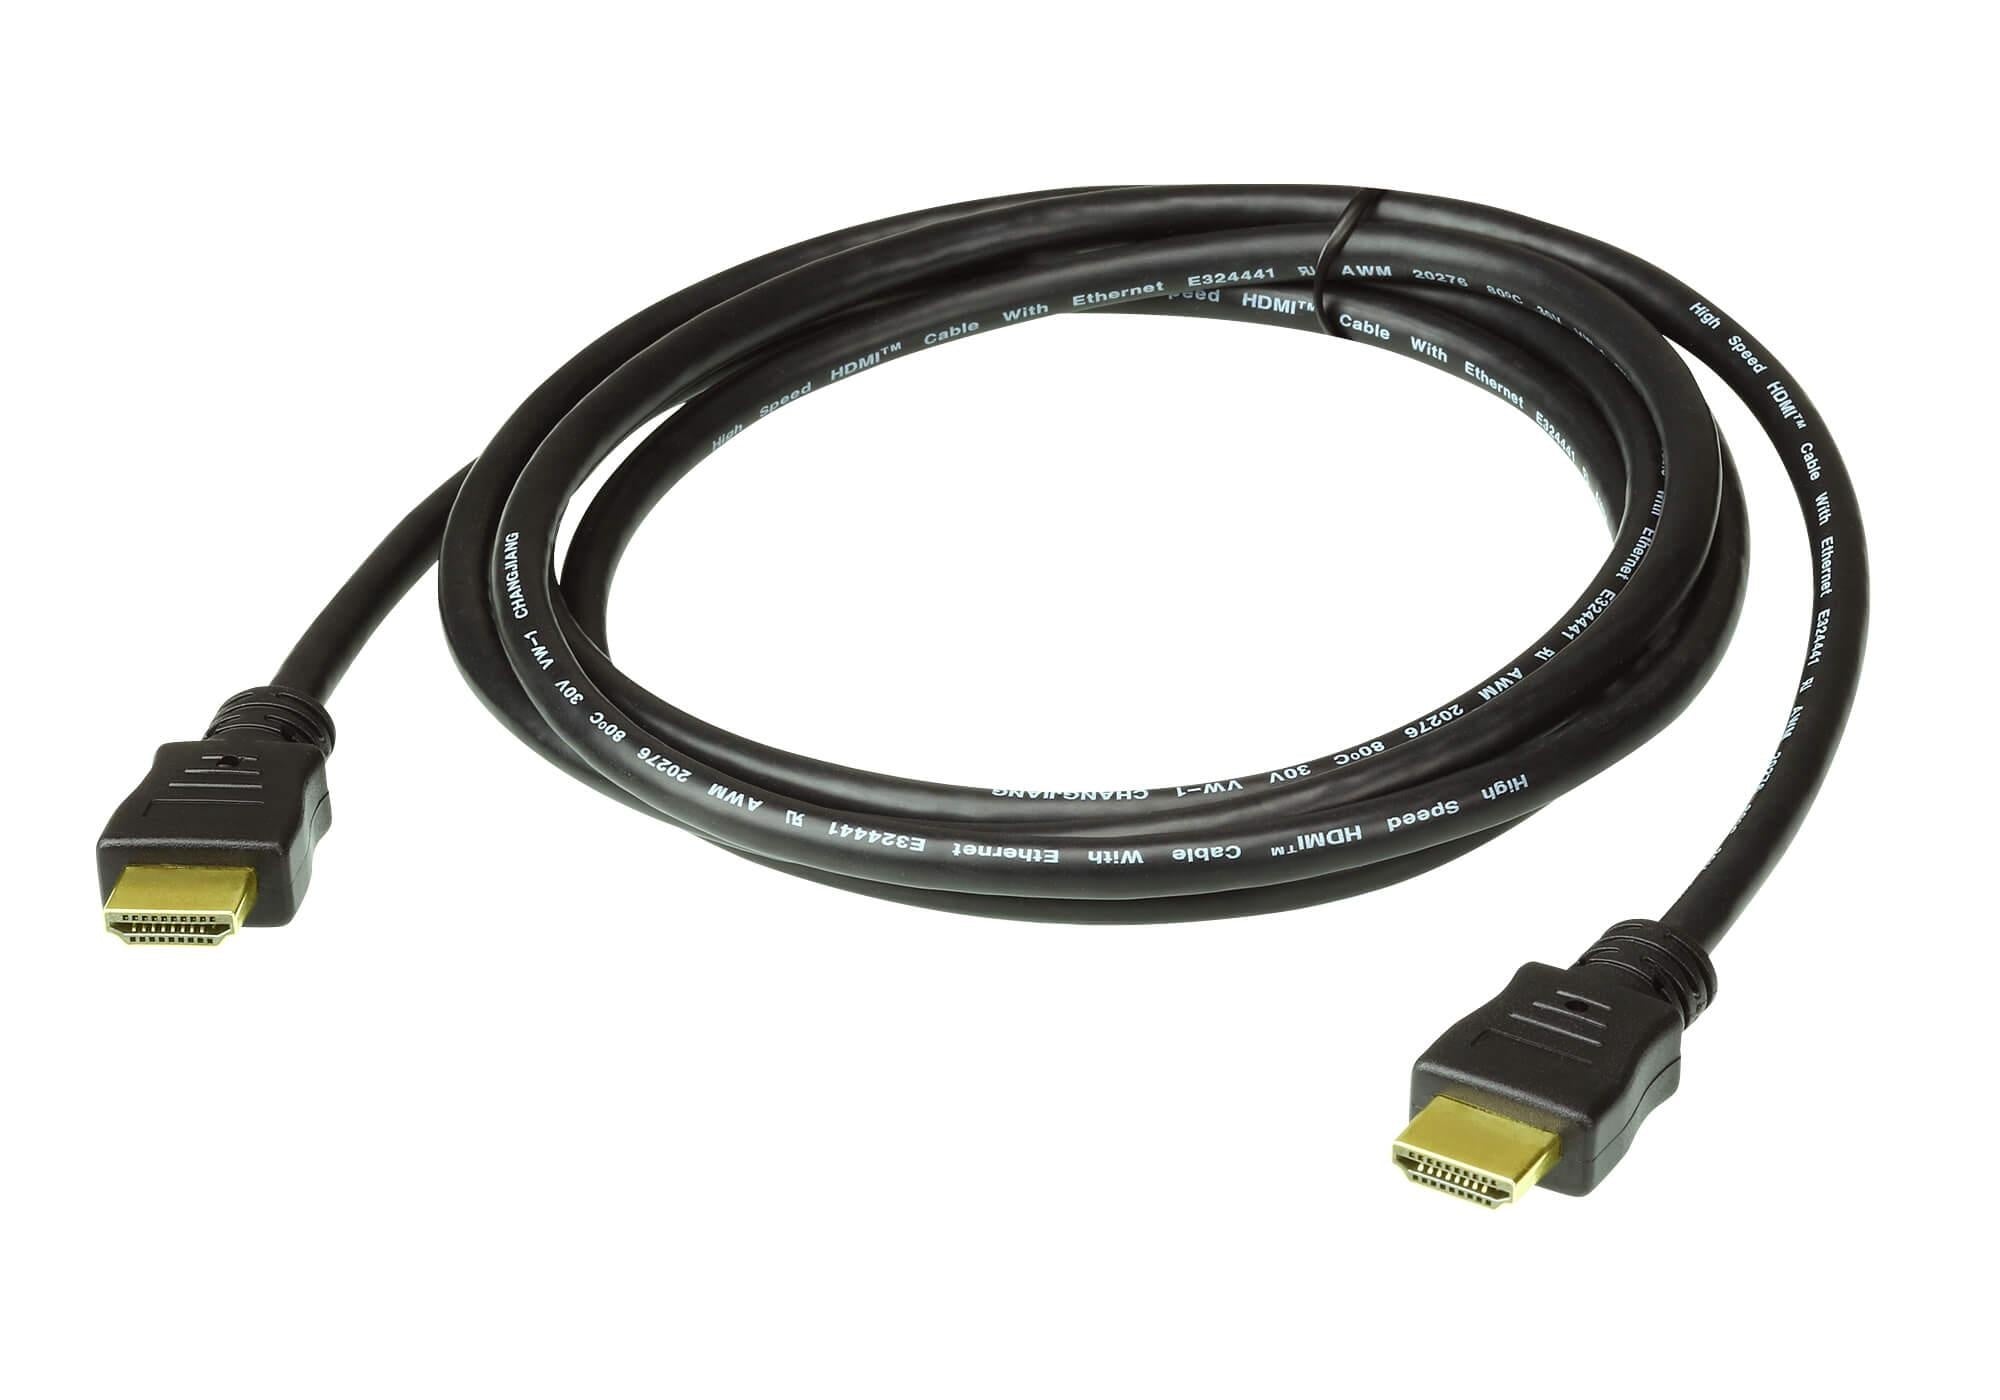 ATEN 3M High Speed HDMI Cable with Ethernet. Support 4K UHD DCI, up to 4096 x 2160 @ 60Hz ATEN